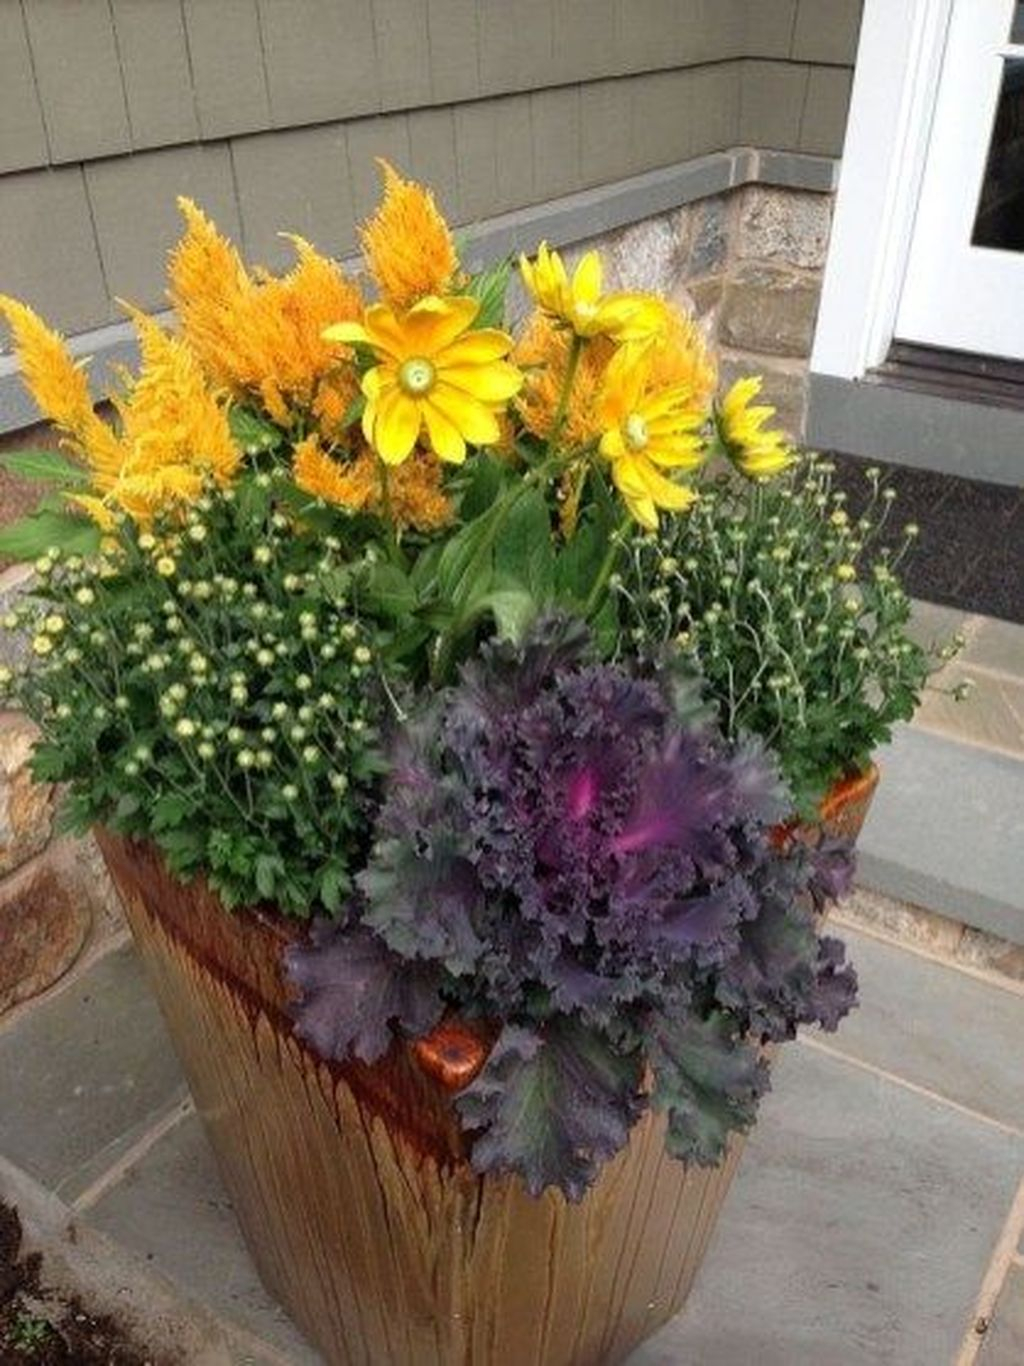 Marvelous Outdoor Holiday Planter Ideas To Beauty Porch Décor 35